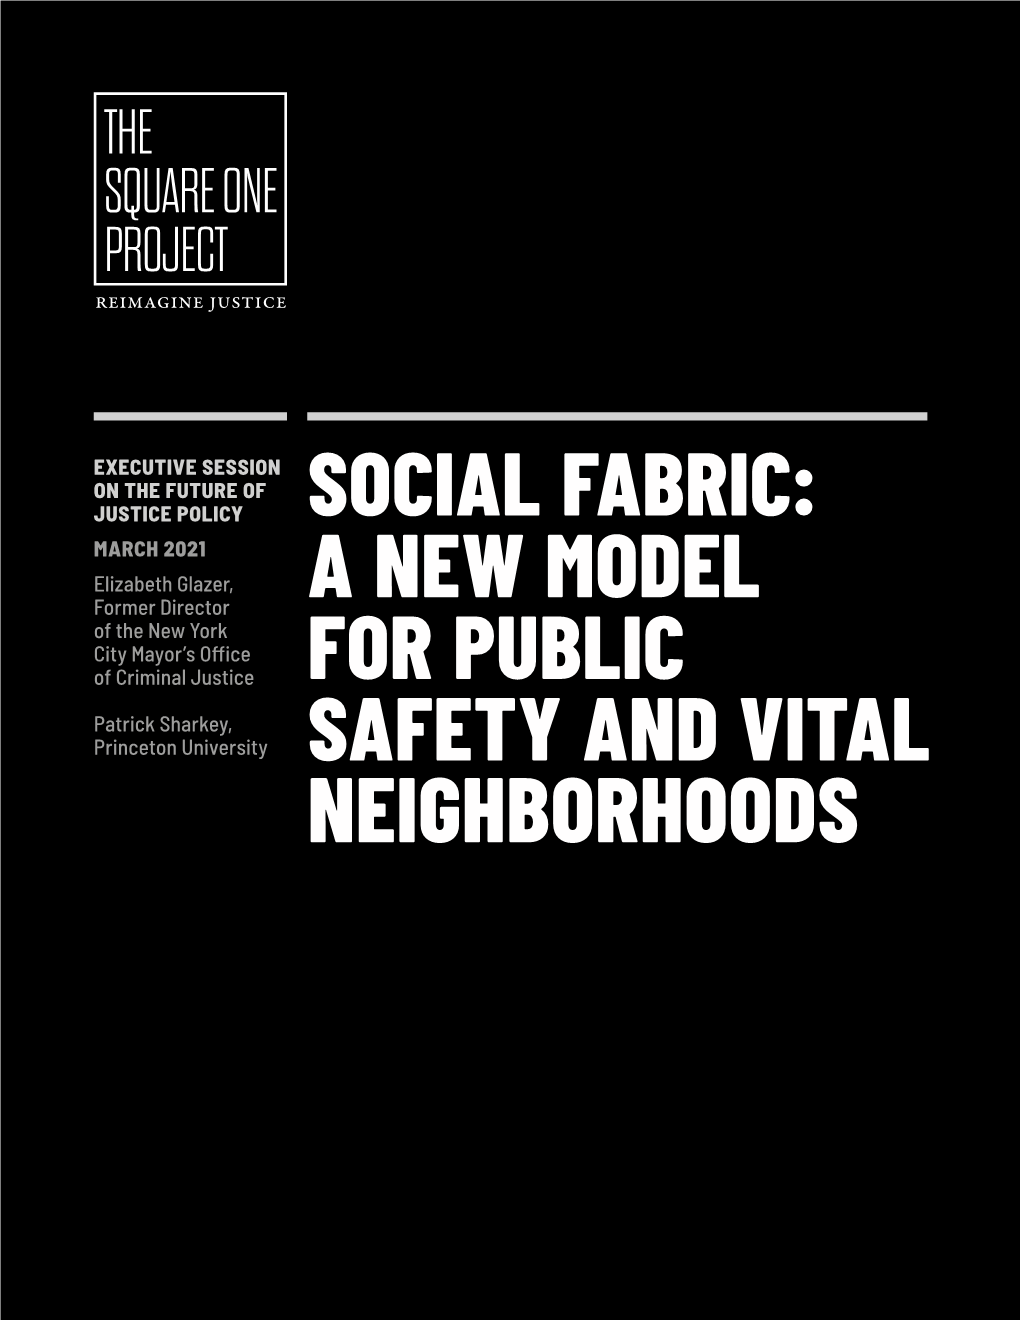 A New Model for Public Safety and Vital Neighborhoods